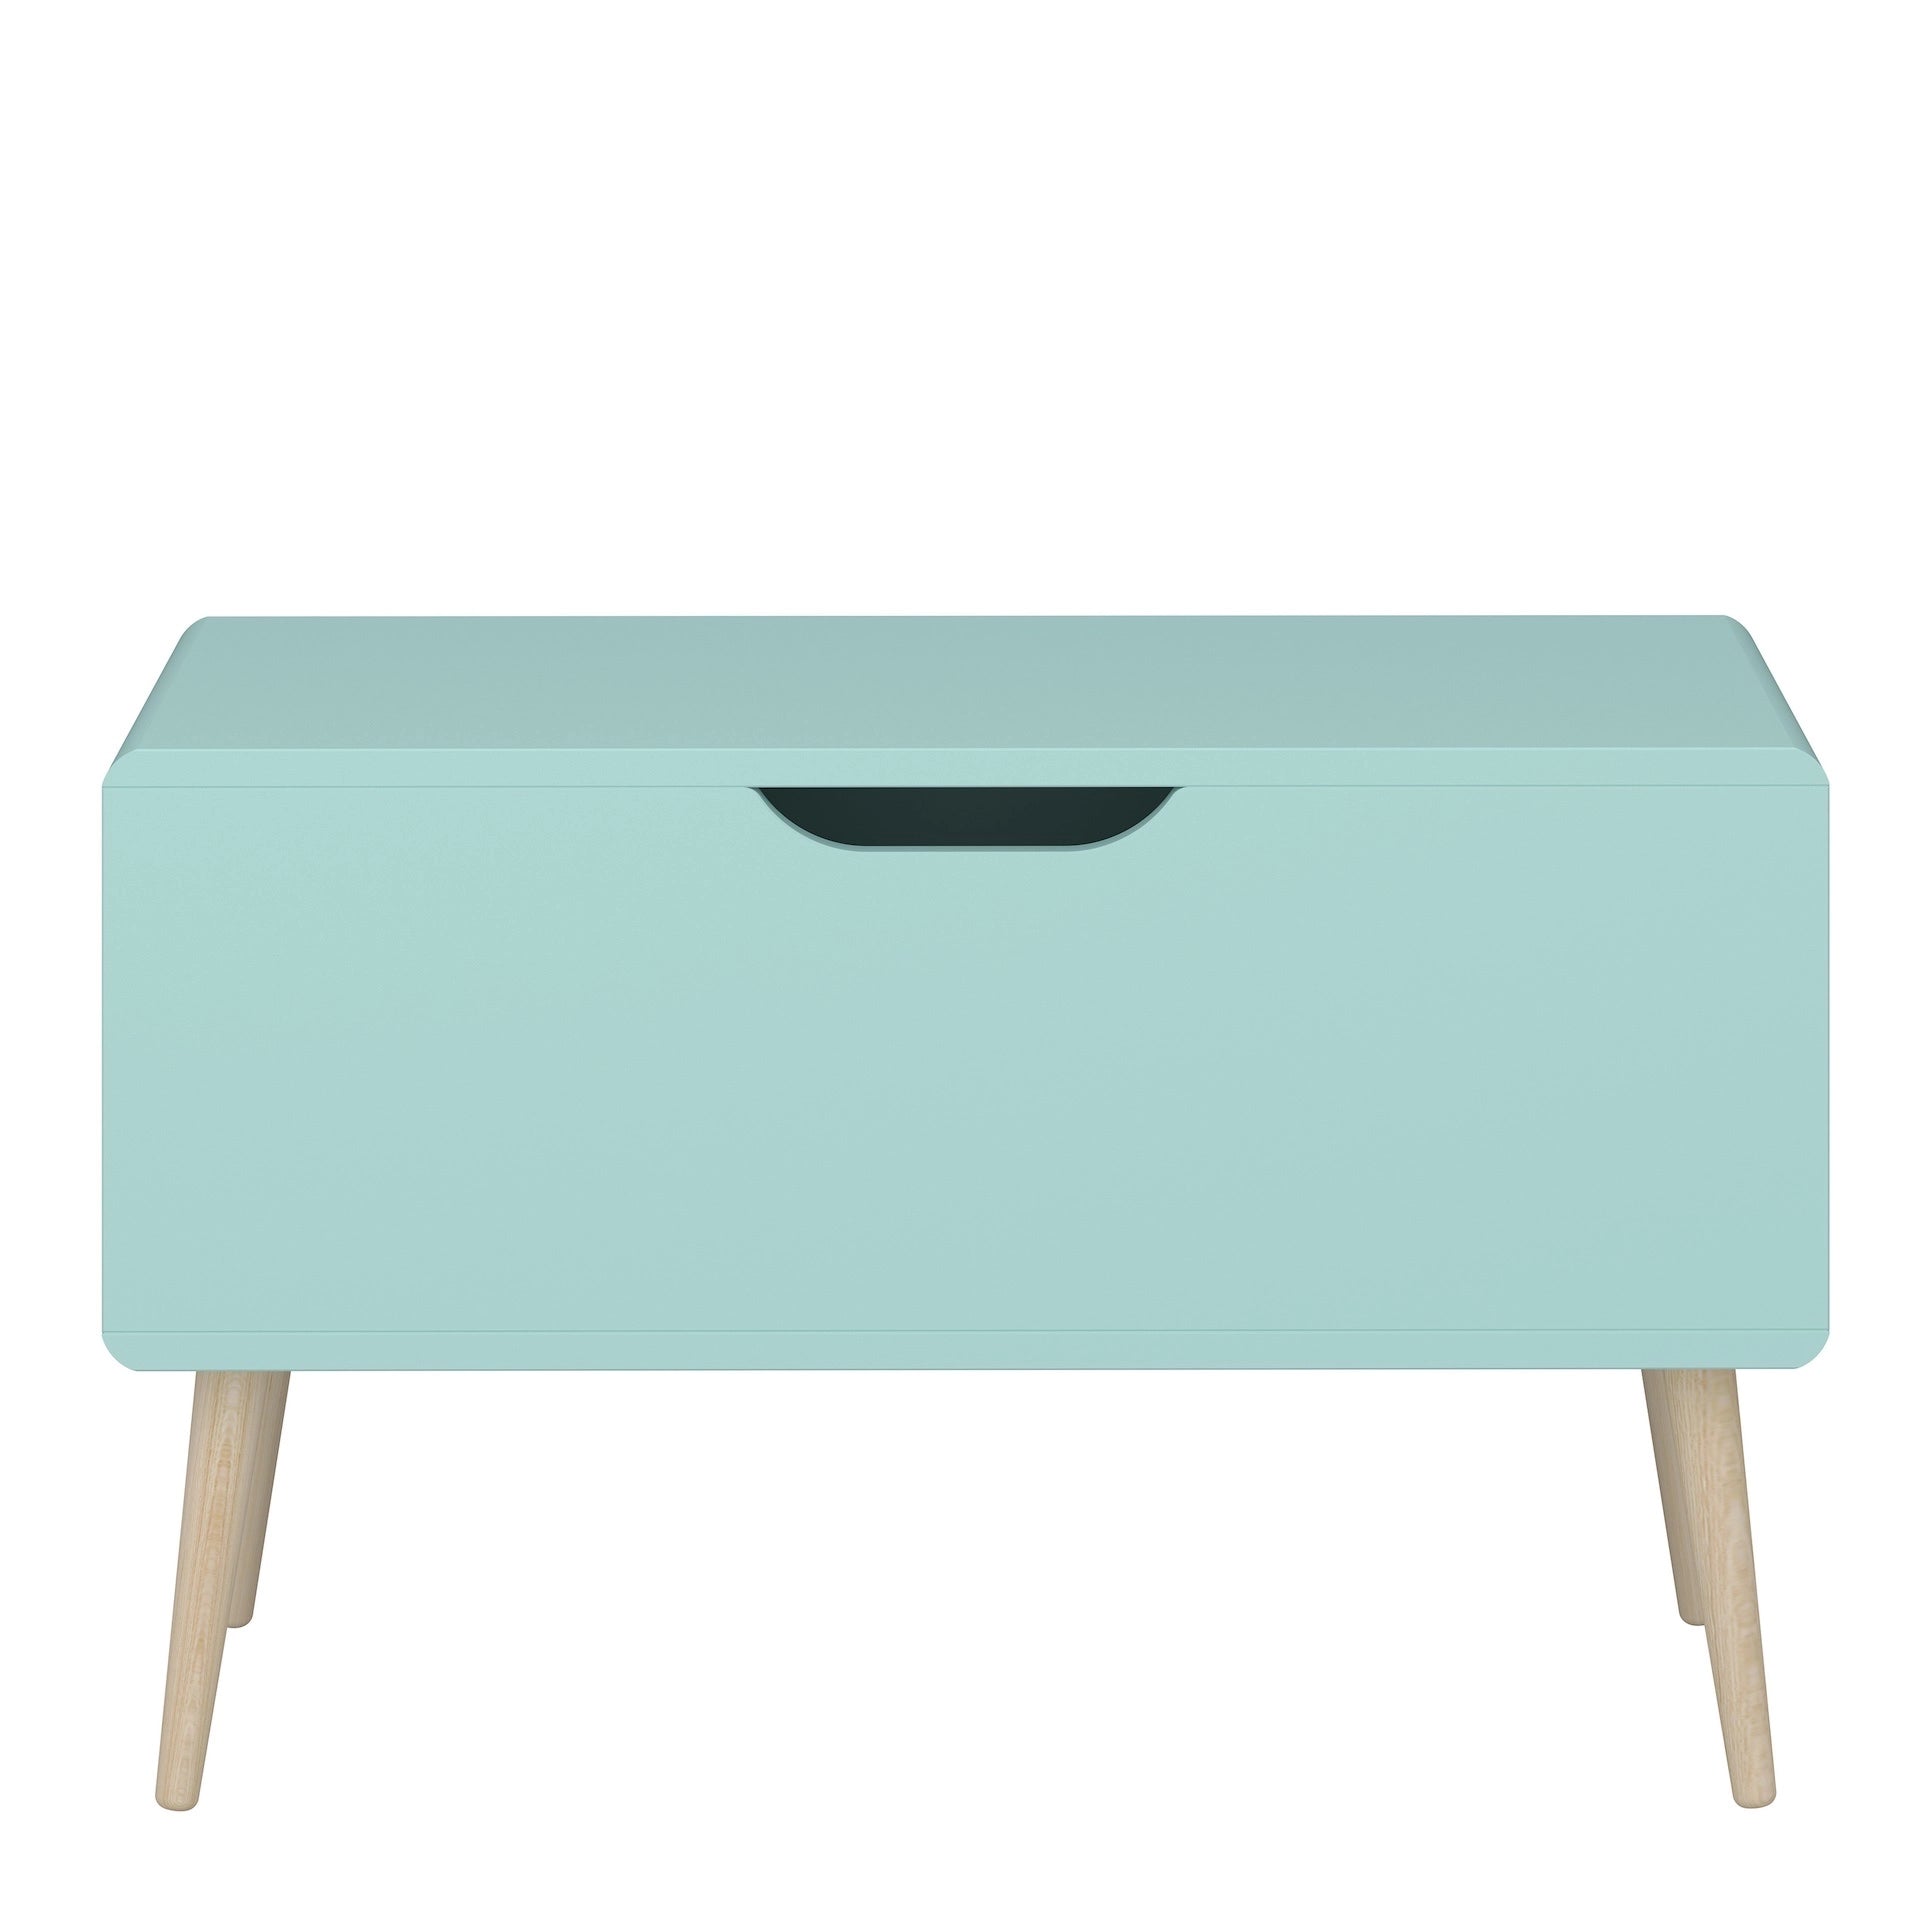 Furniture To Go Gaia Toy Box in Cool Mint